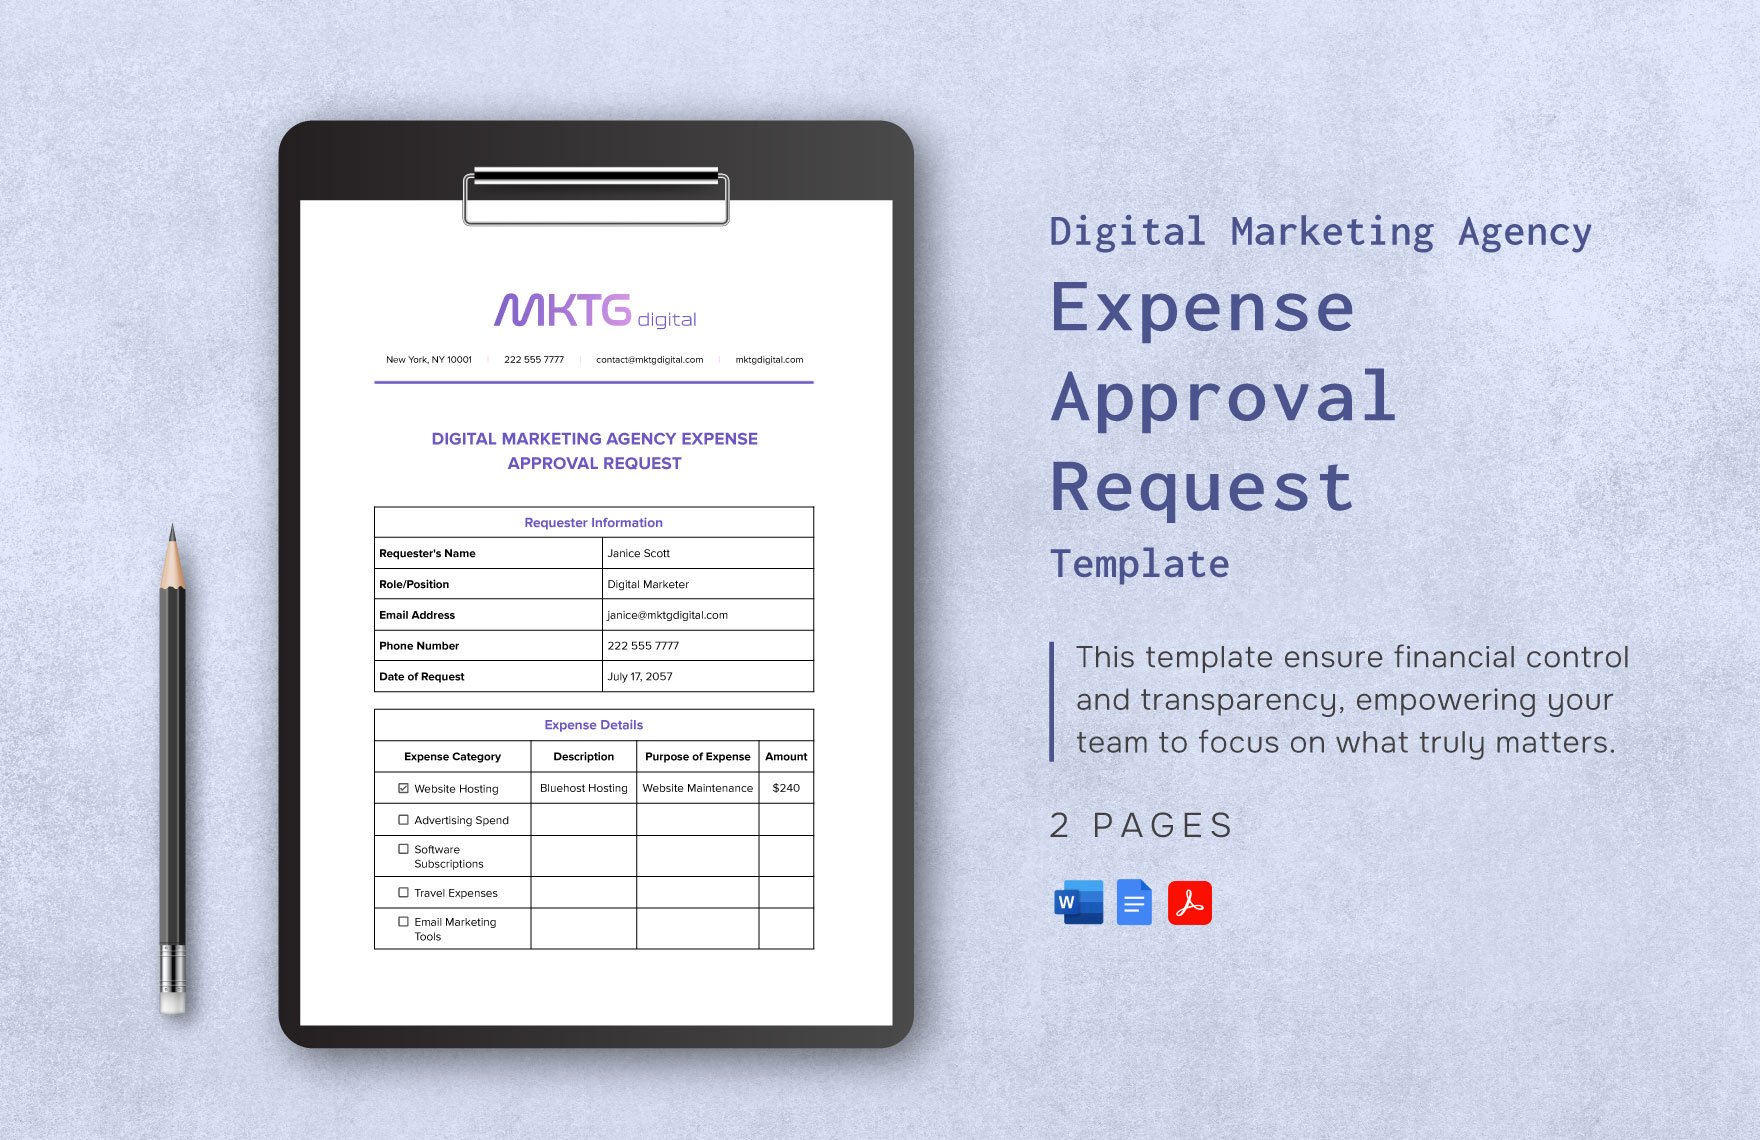 Digital Marketing Agency Expense Approval Request Template